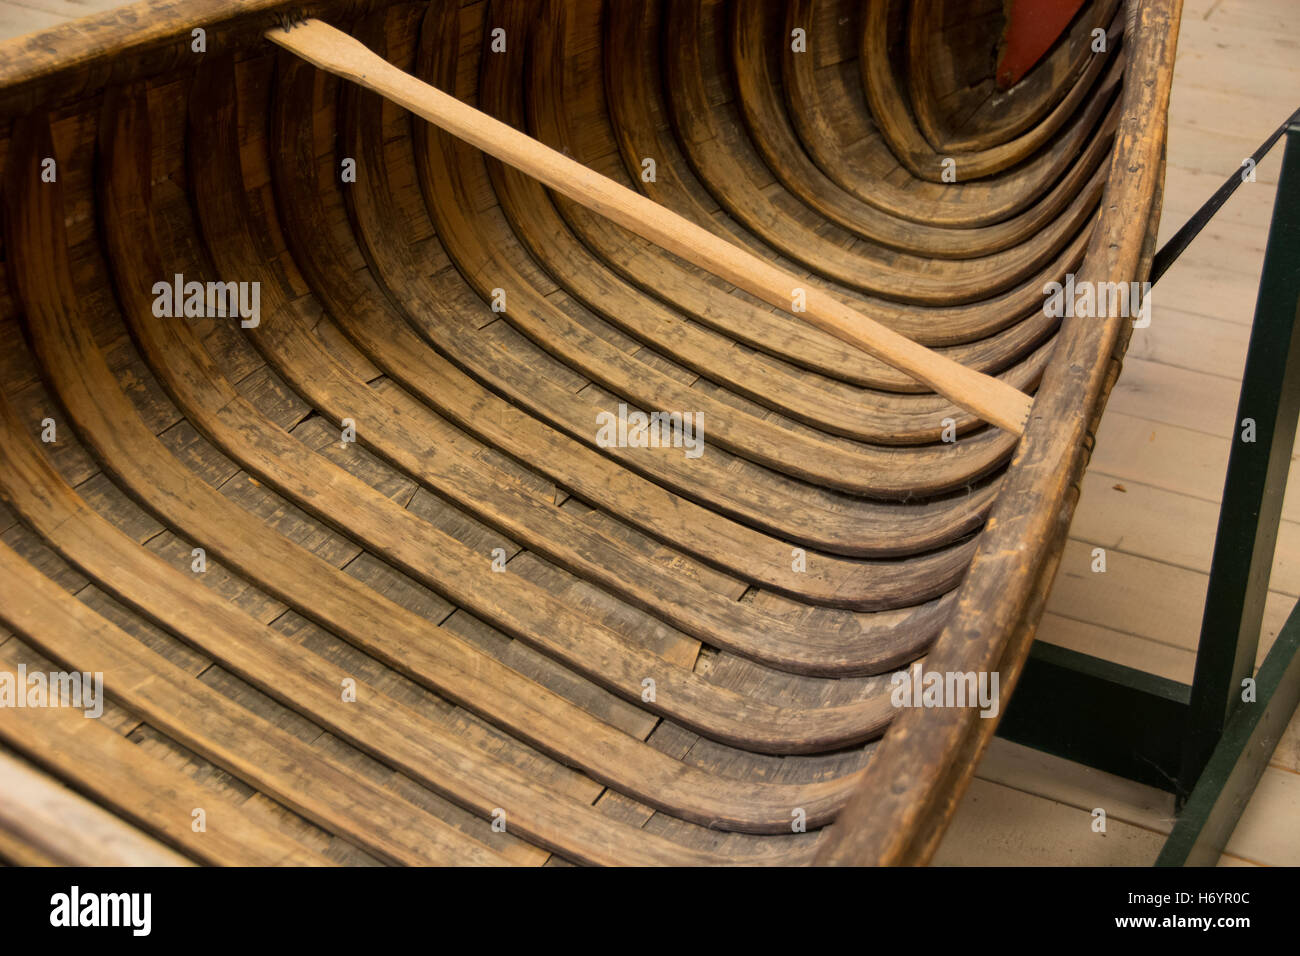 New York, Clayton, Antique Boat Museum. Classic birch bark canoe. Editorial only. Stock Photo